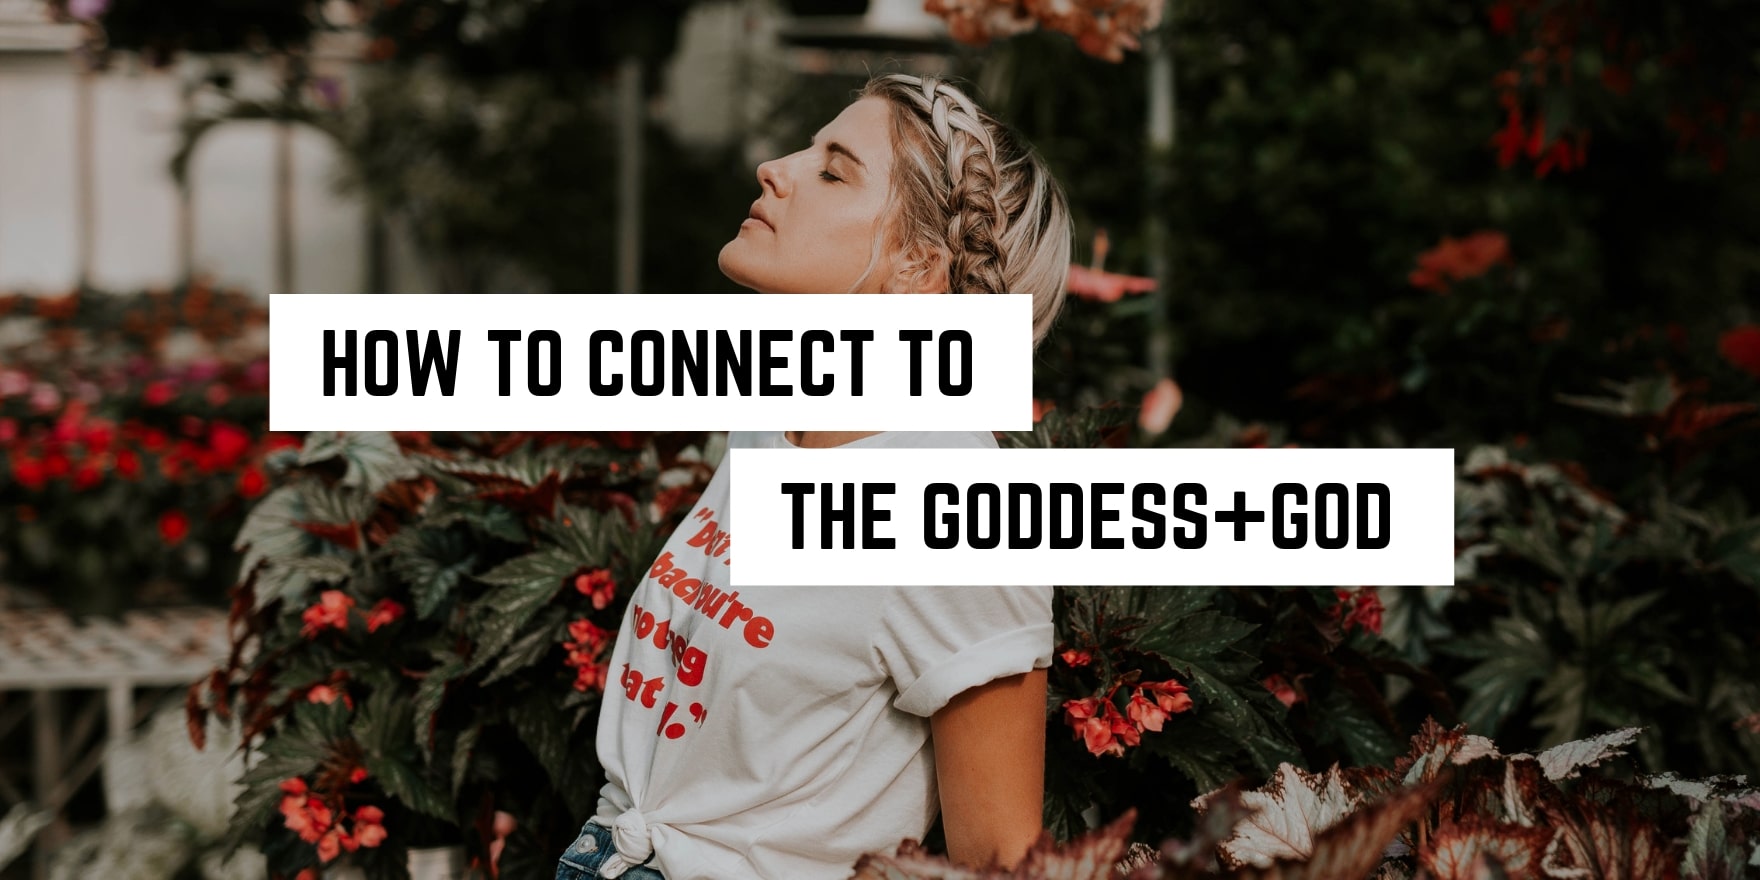 A woman in a contemplative pose surrounded by flowers with text overlay "how to connect to the goddess+god through spiritual practices".